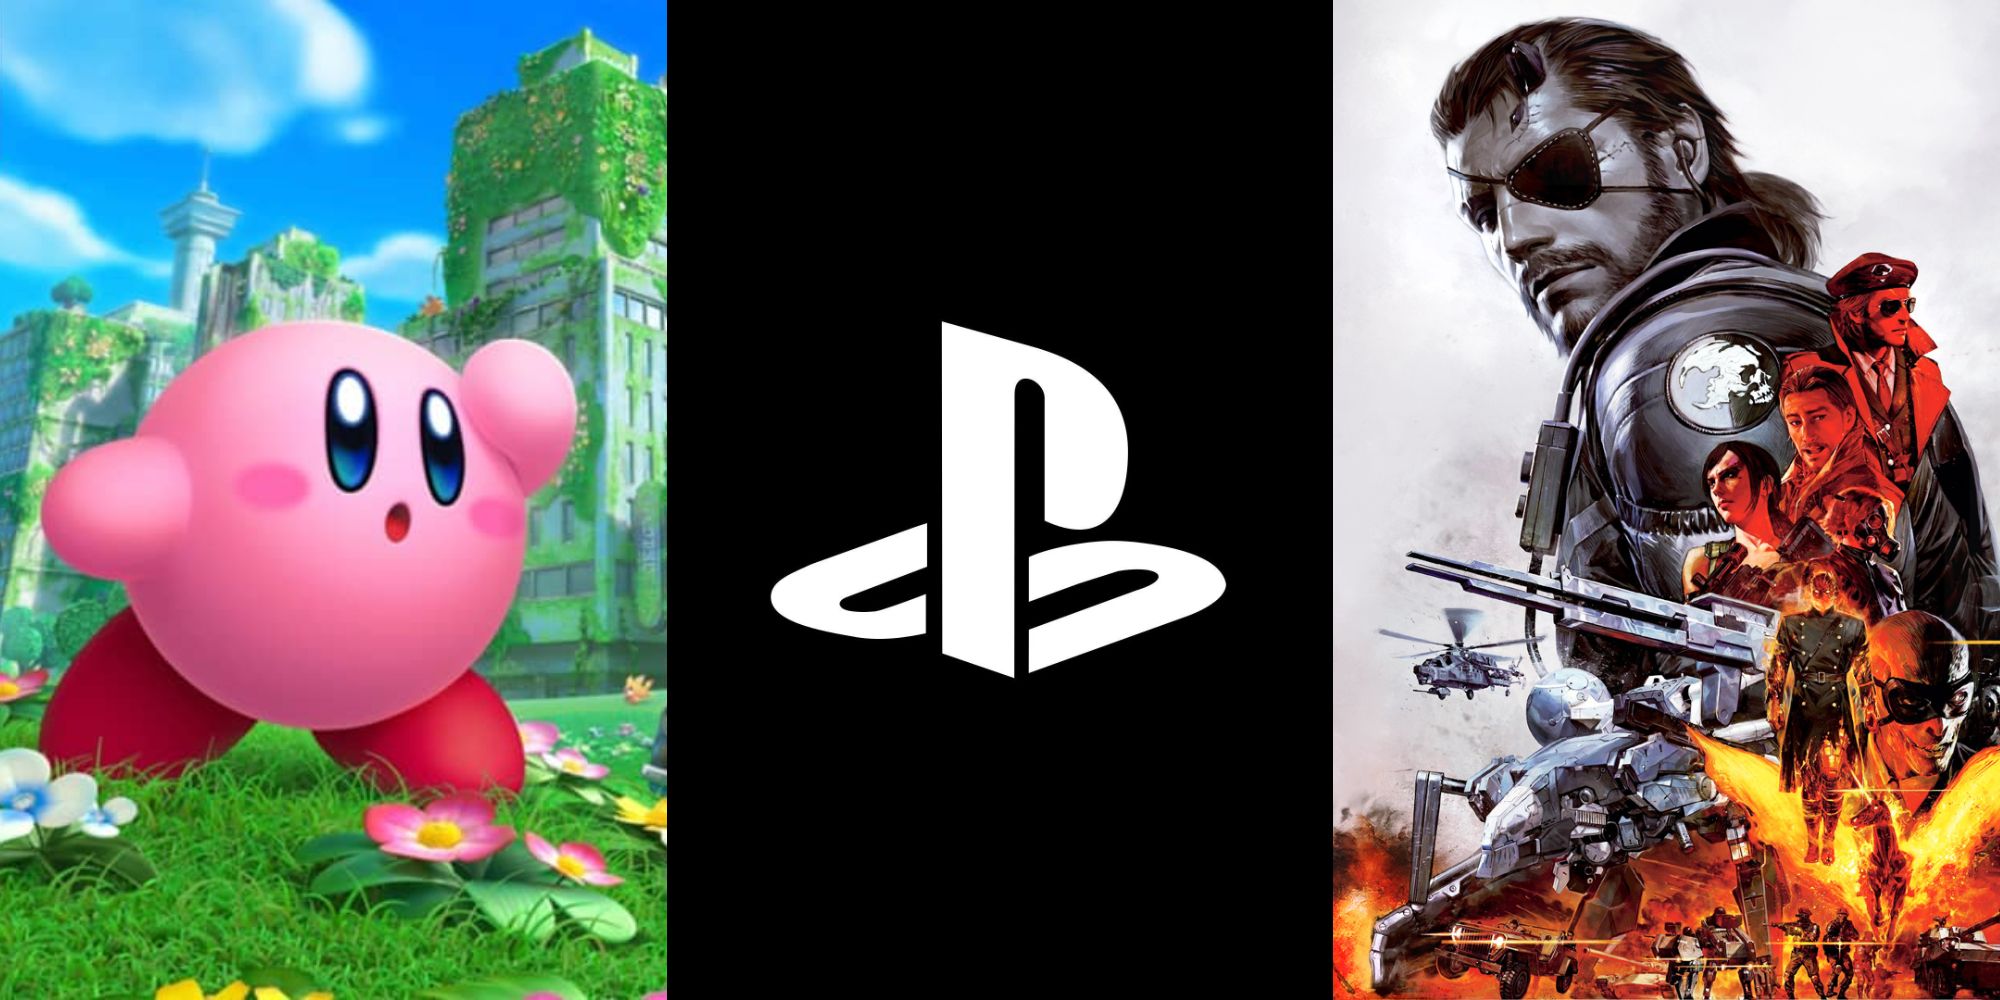 Kirby, a PlayStation logo, and characters from Metal Gear Solid 5